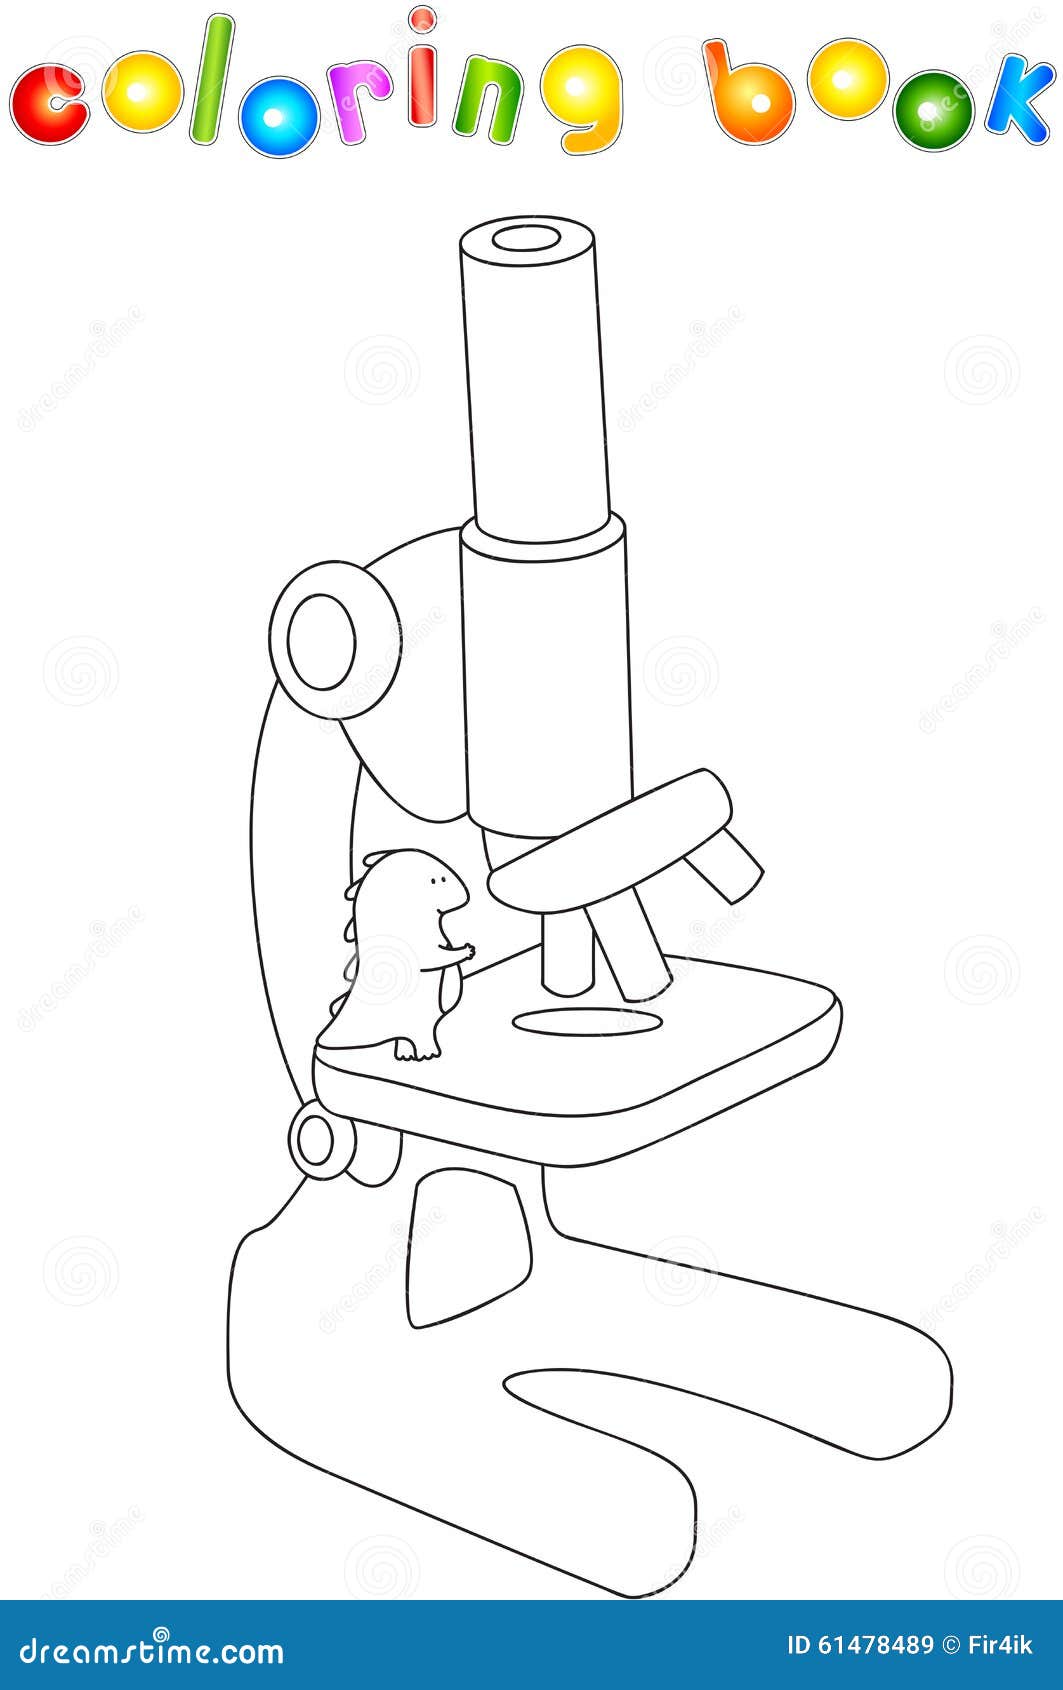 microscope clipart for kids